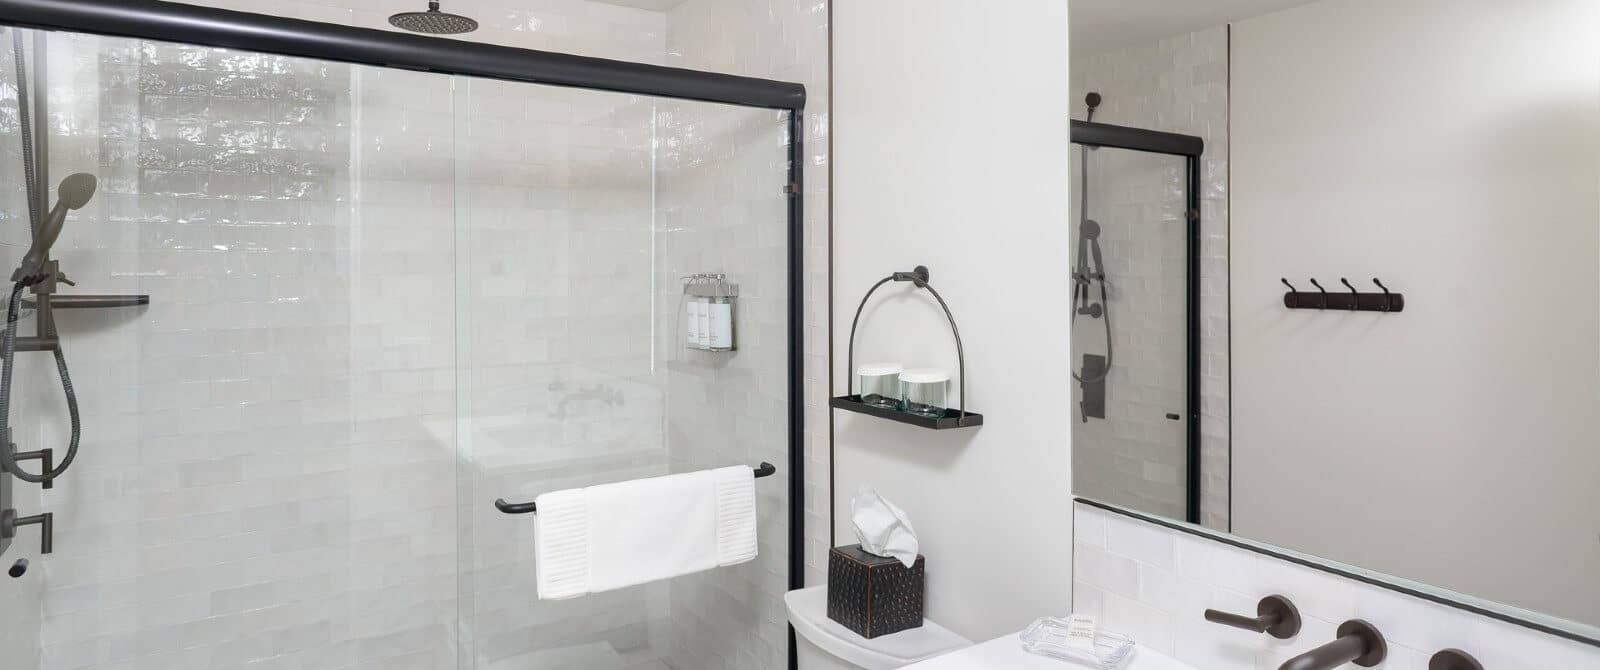 Black and white bathroom with glass door stand up shower and vanity with mirror